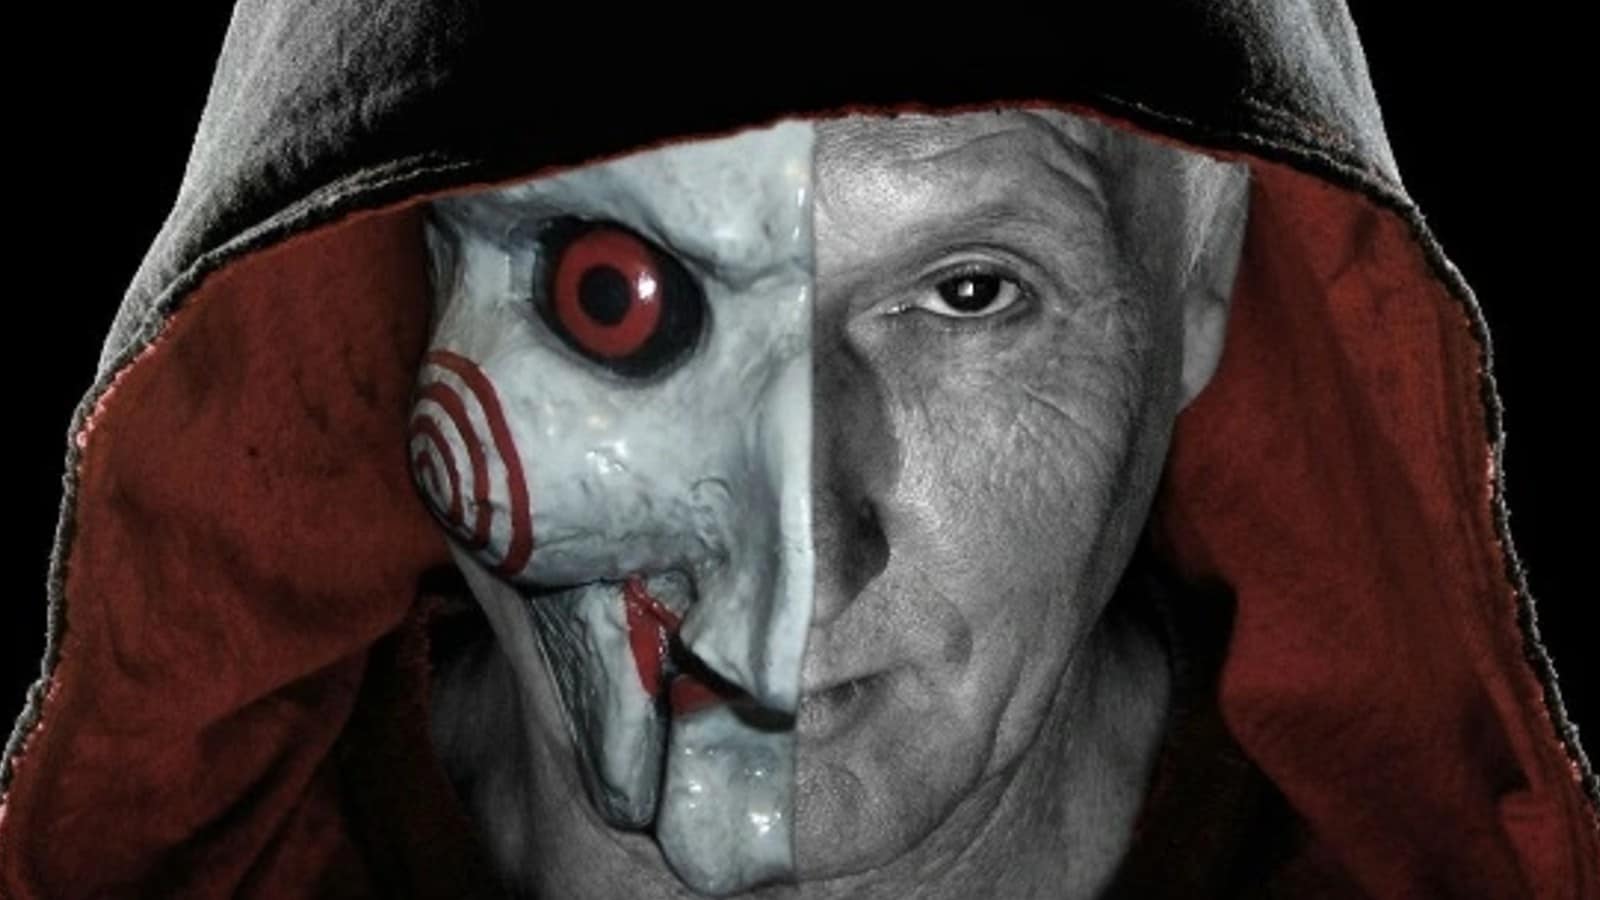 Tobin Bell as Jigsaw in the Saw franchise